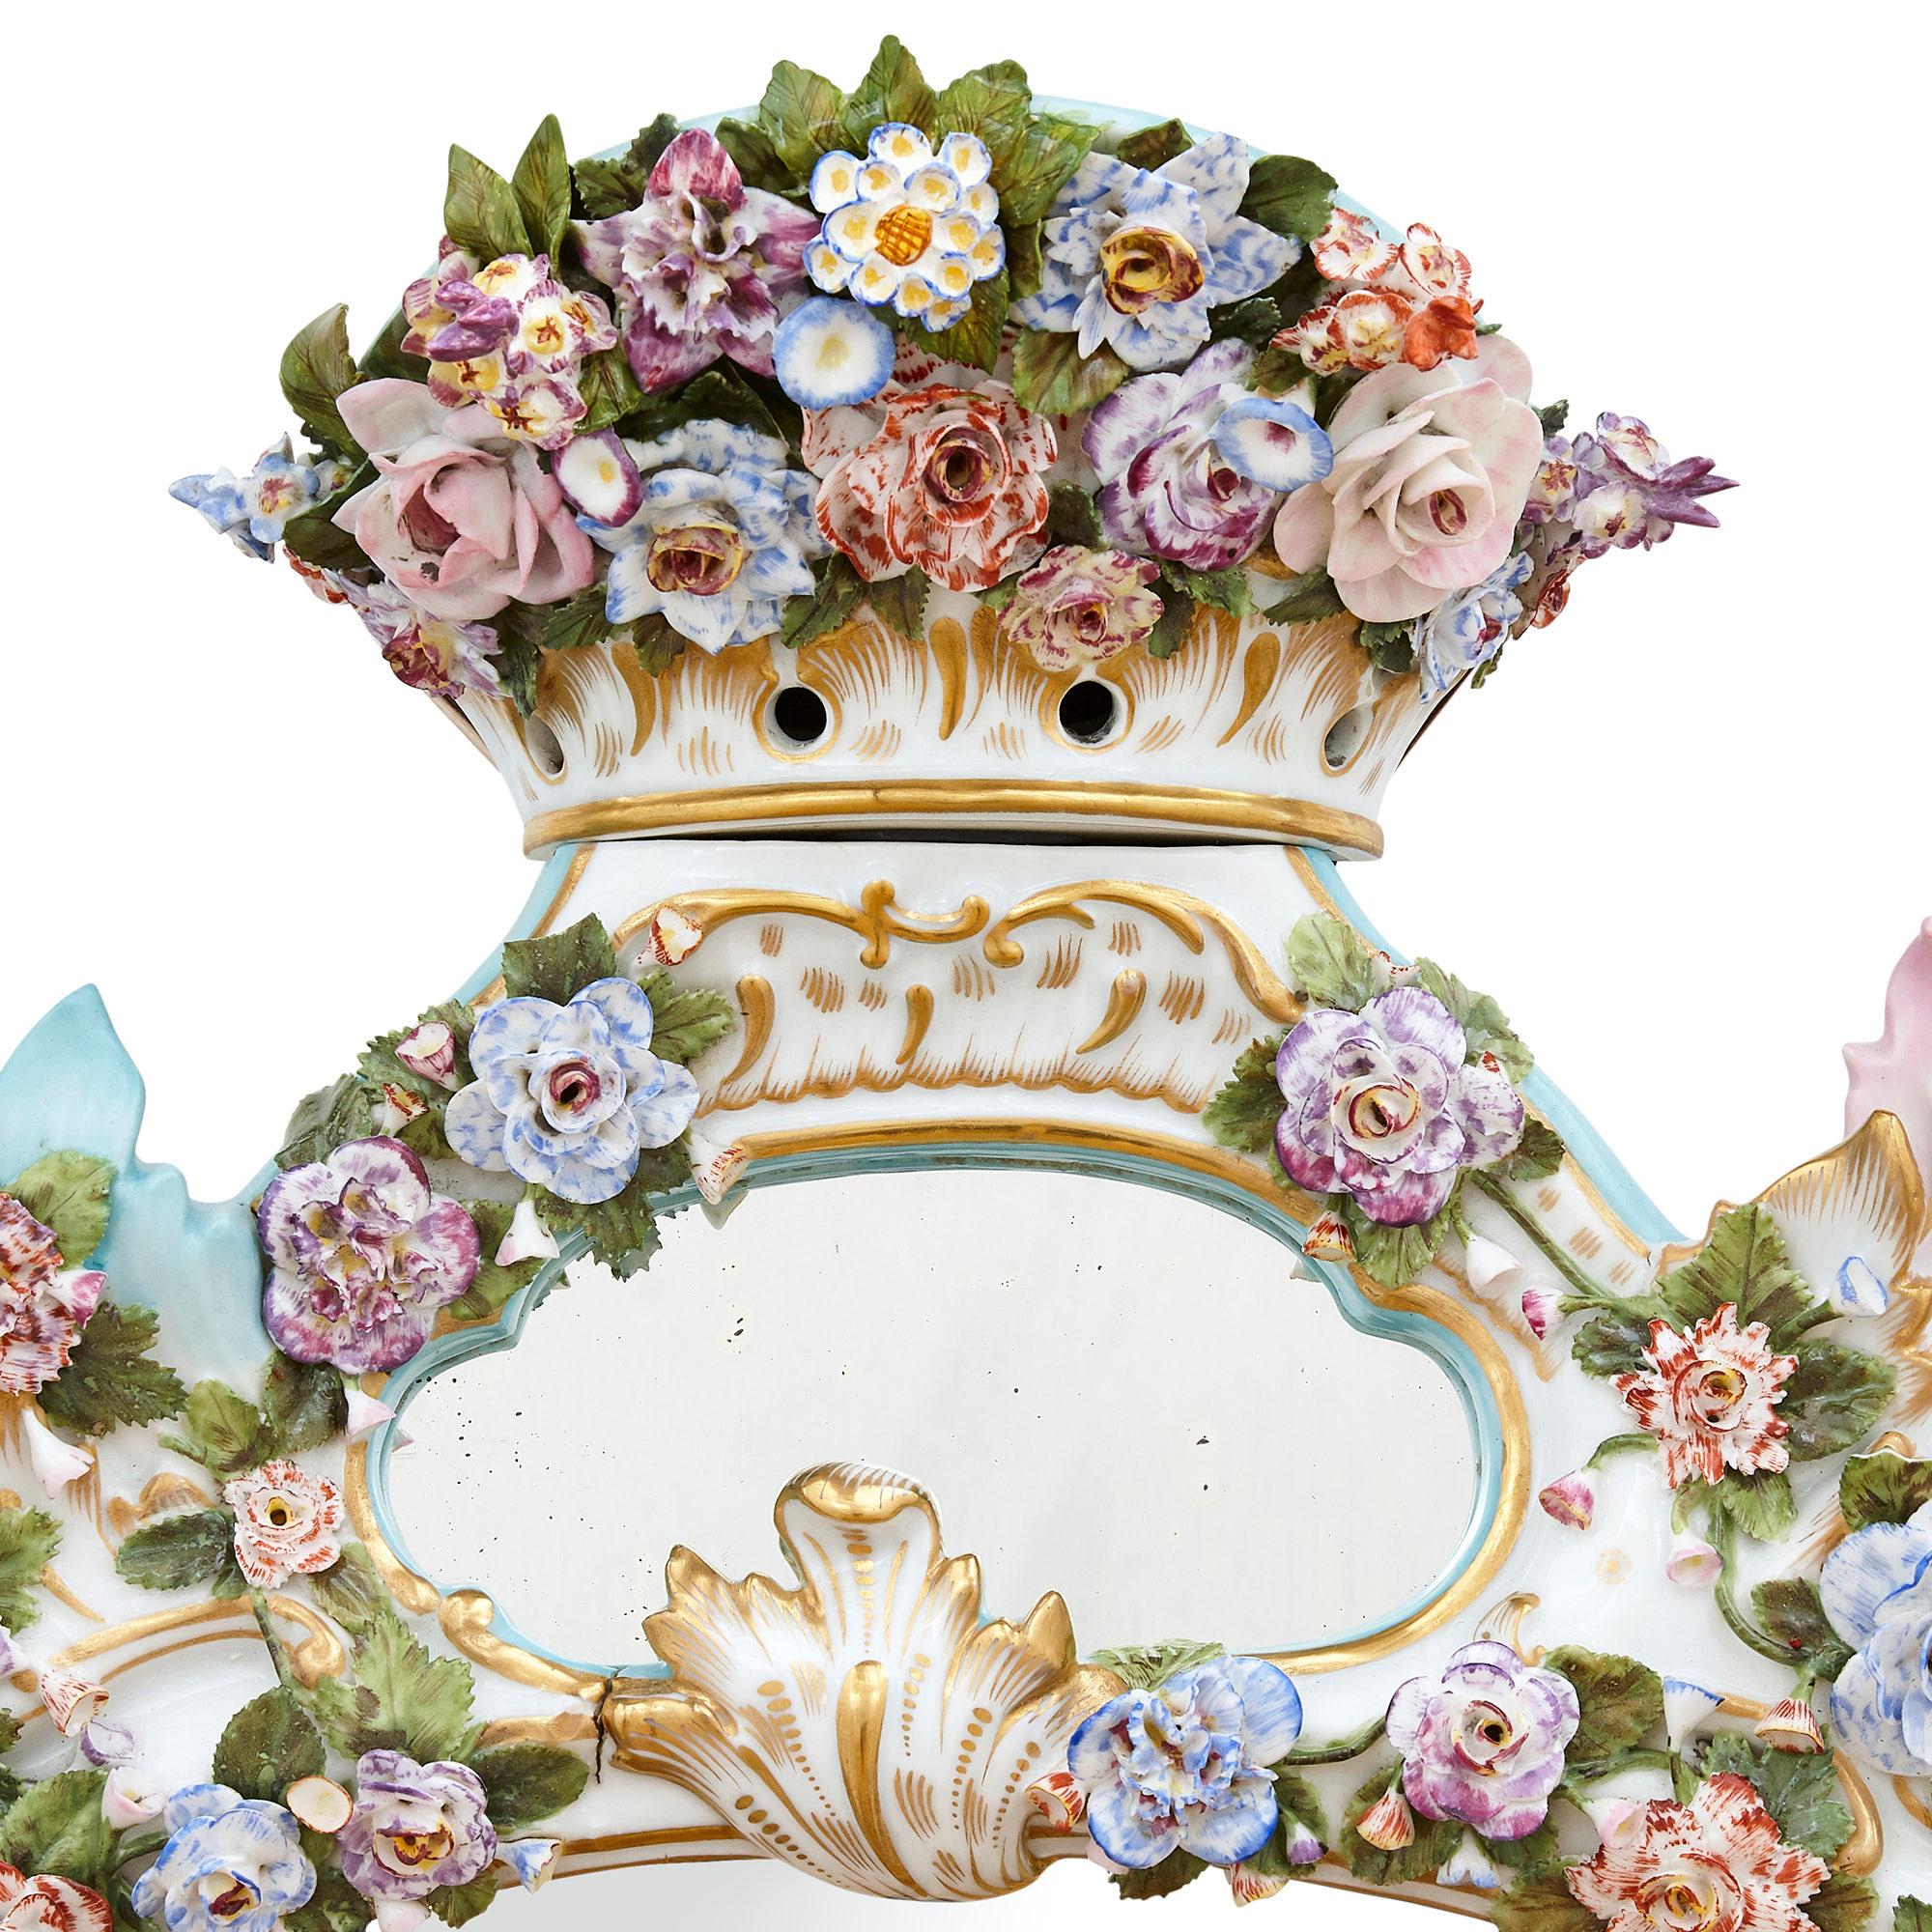 Antique Rococo style porcelain mirror by Meissen
German, 19th century 
Measures: Height 94cm, width 66cm, depth 14cm

Manufactured by the renowned Meissen Porcelain factory, which was established in 1710 and patronised by the greatest of